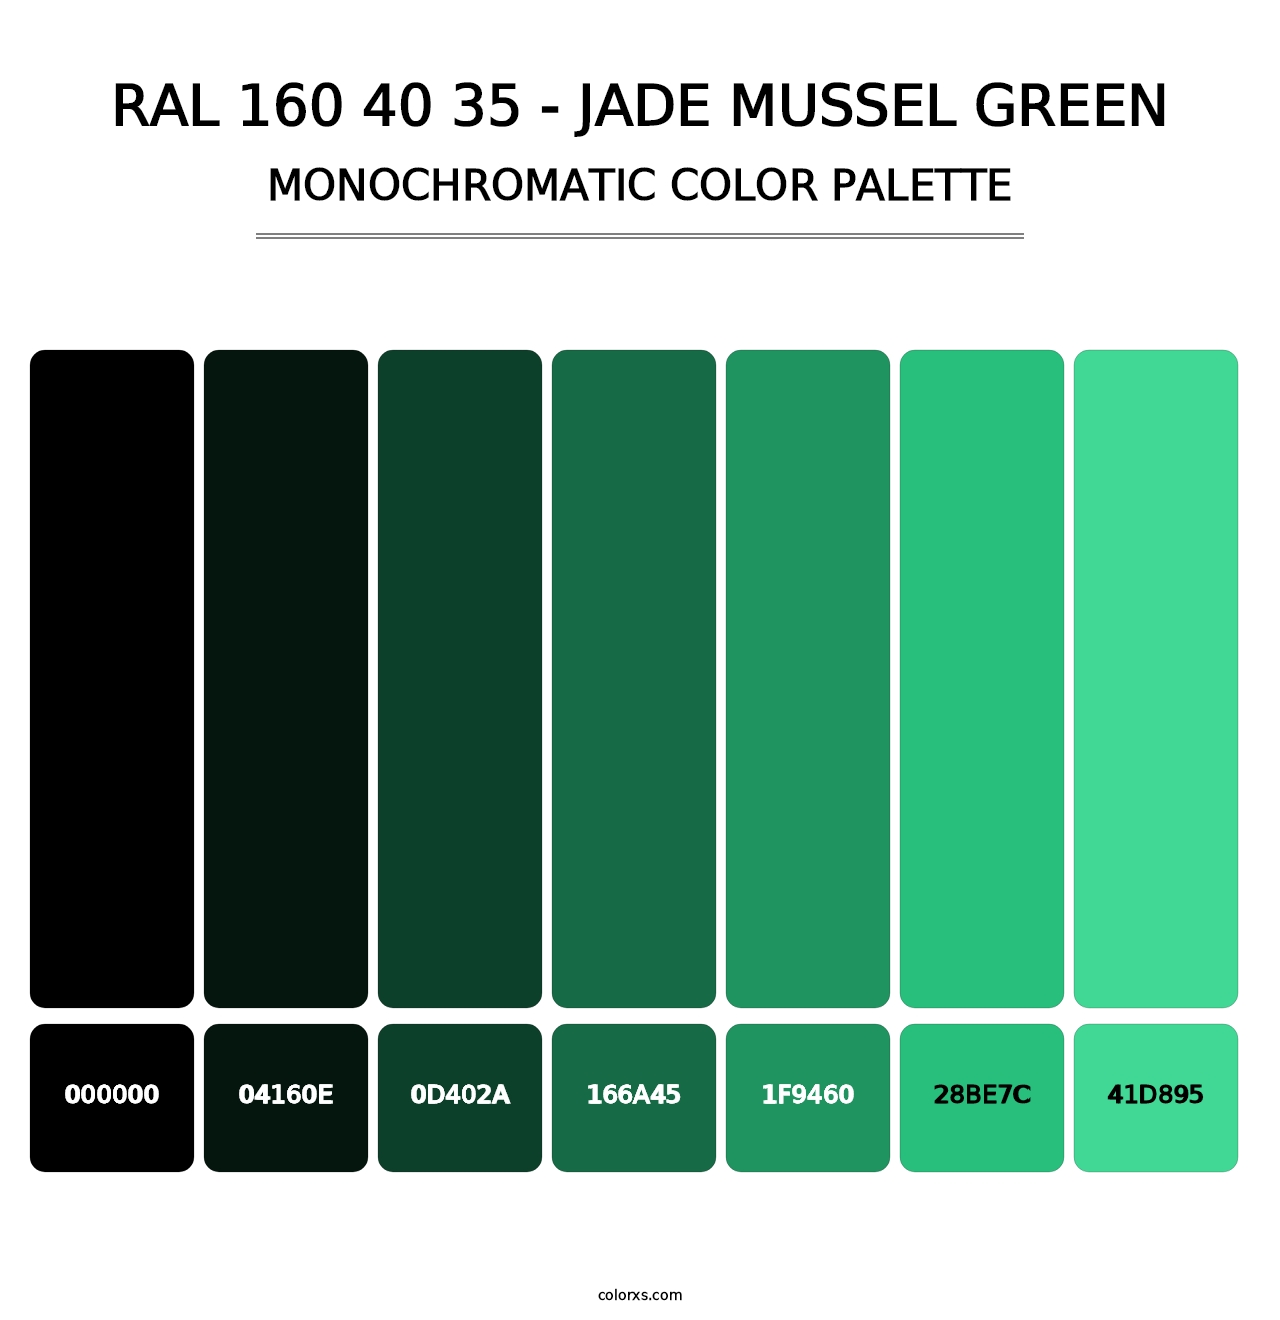 RAL 160 40 35 - Jade Mussel Green - Monochromatic Color Palette